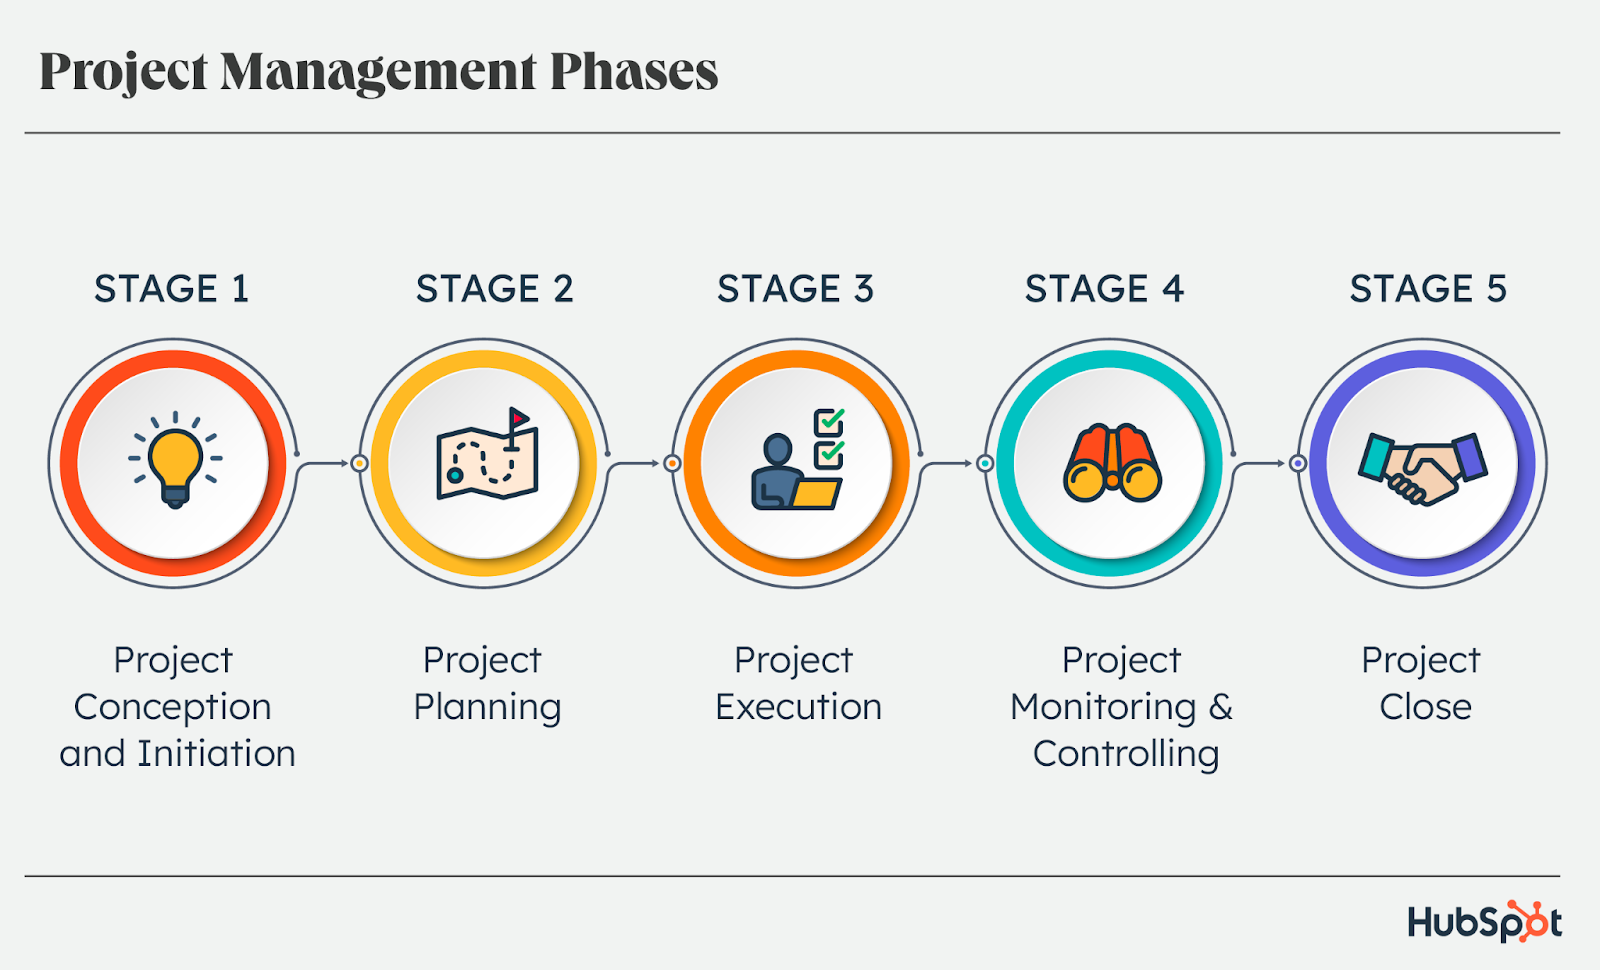 project%20management%20phases.png?width=1600&height=970&name=project%20management%20phases - The 5 Phases of Project Management